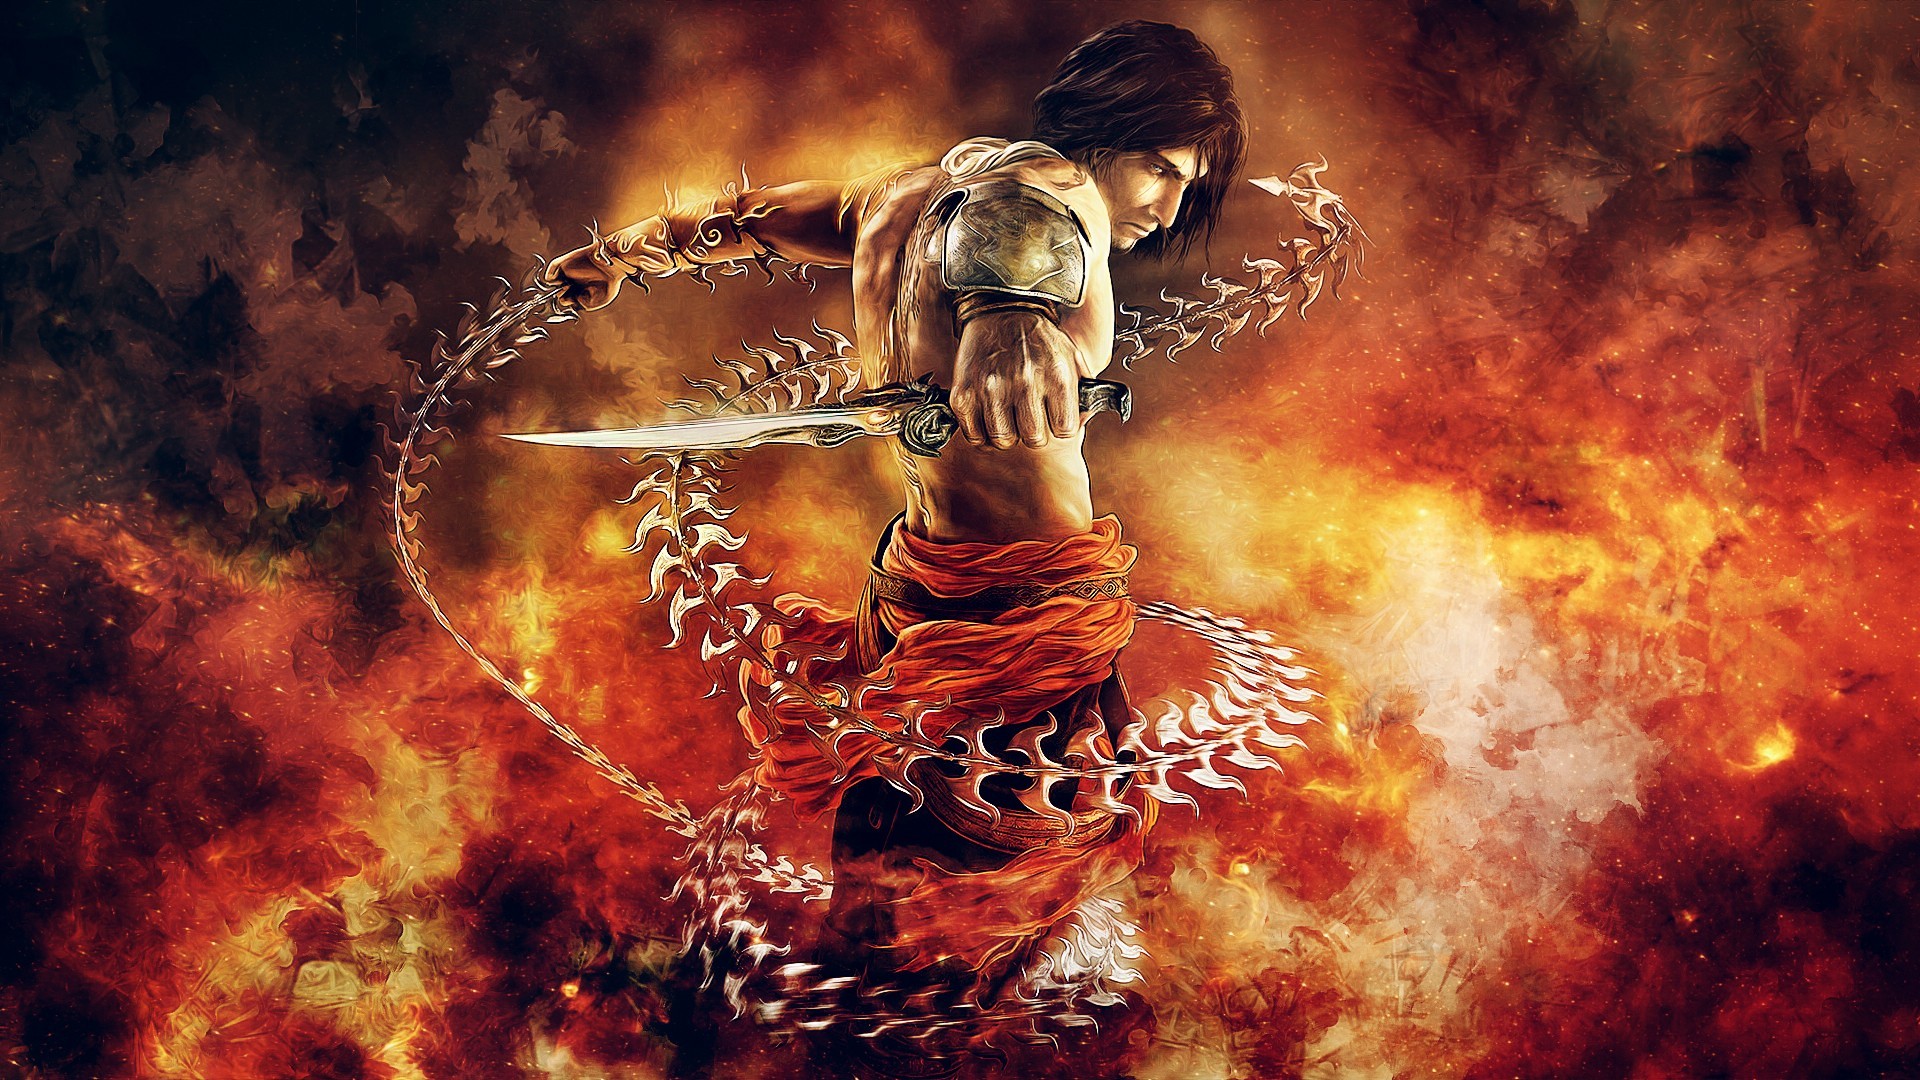 Prince Of Persia Wallpapers Download